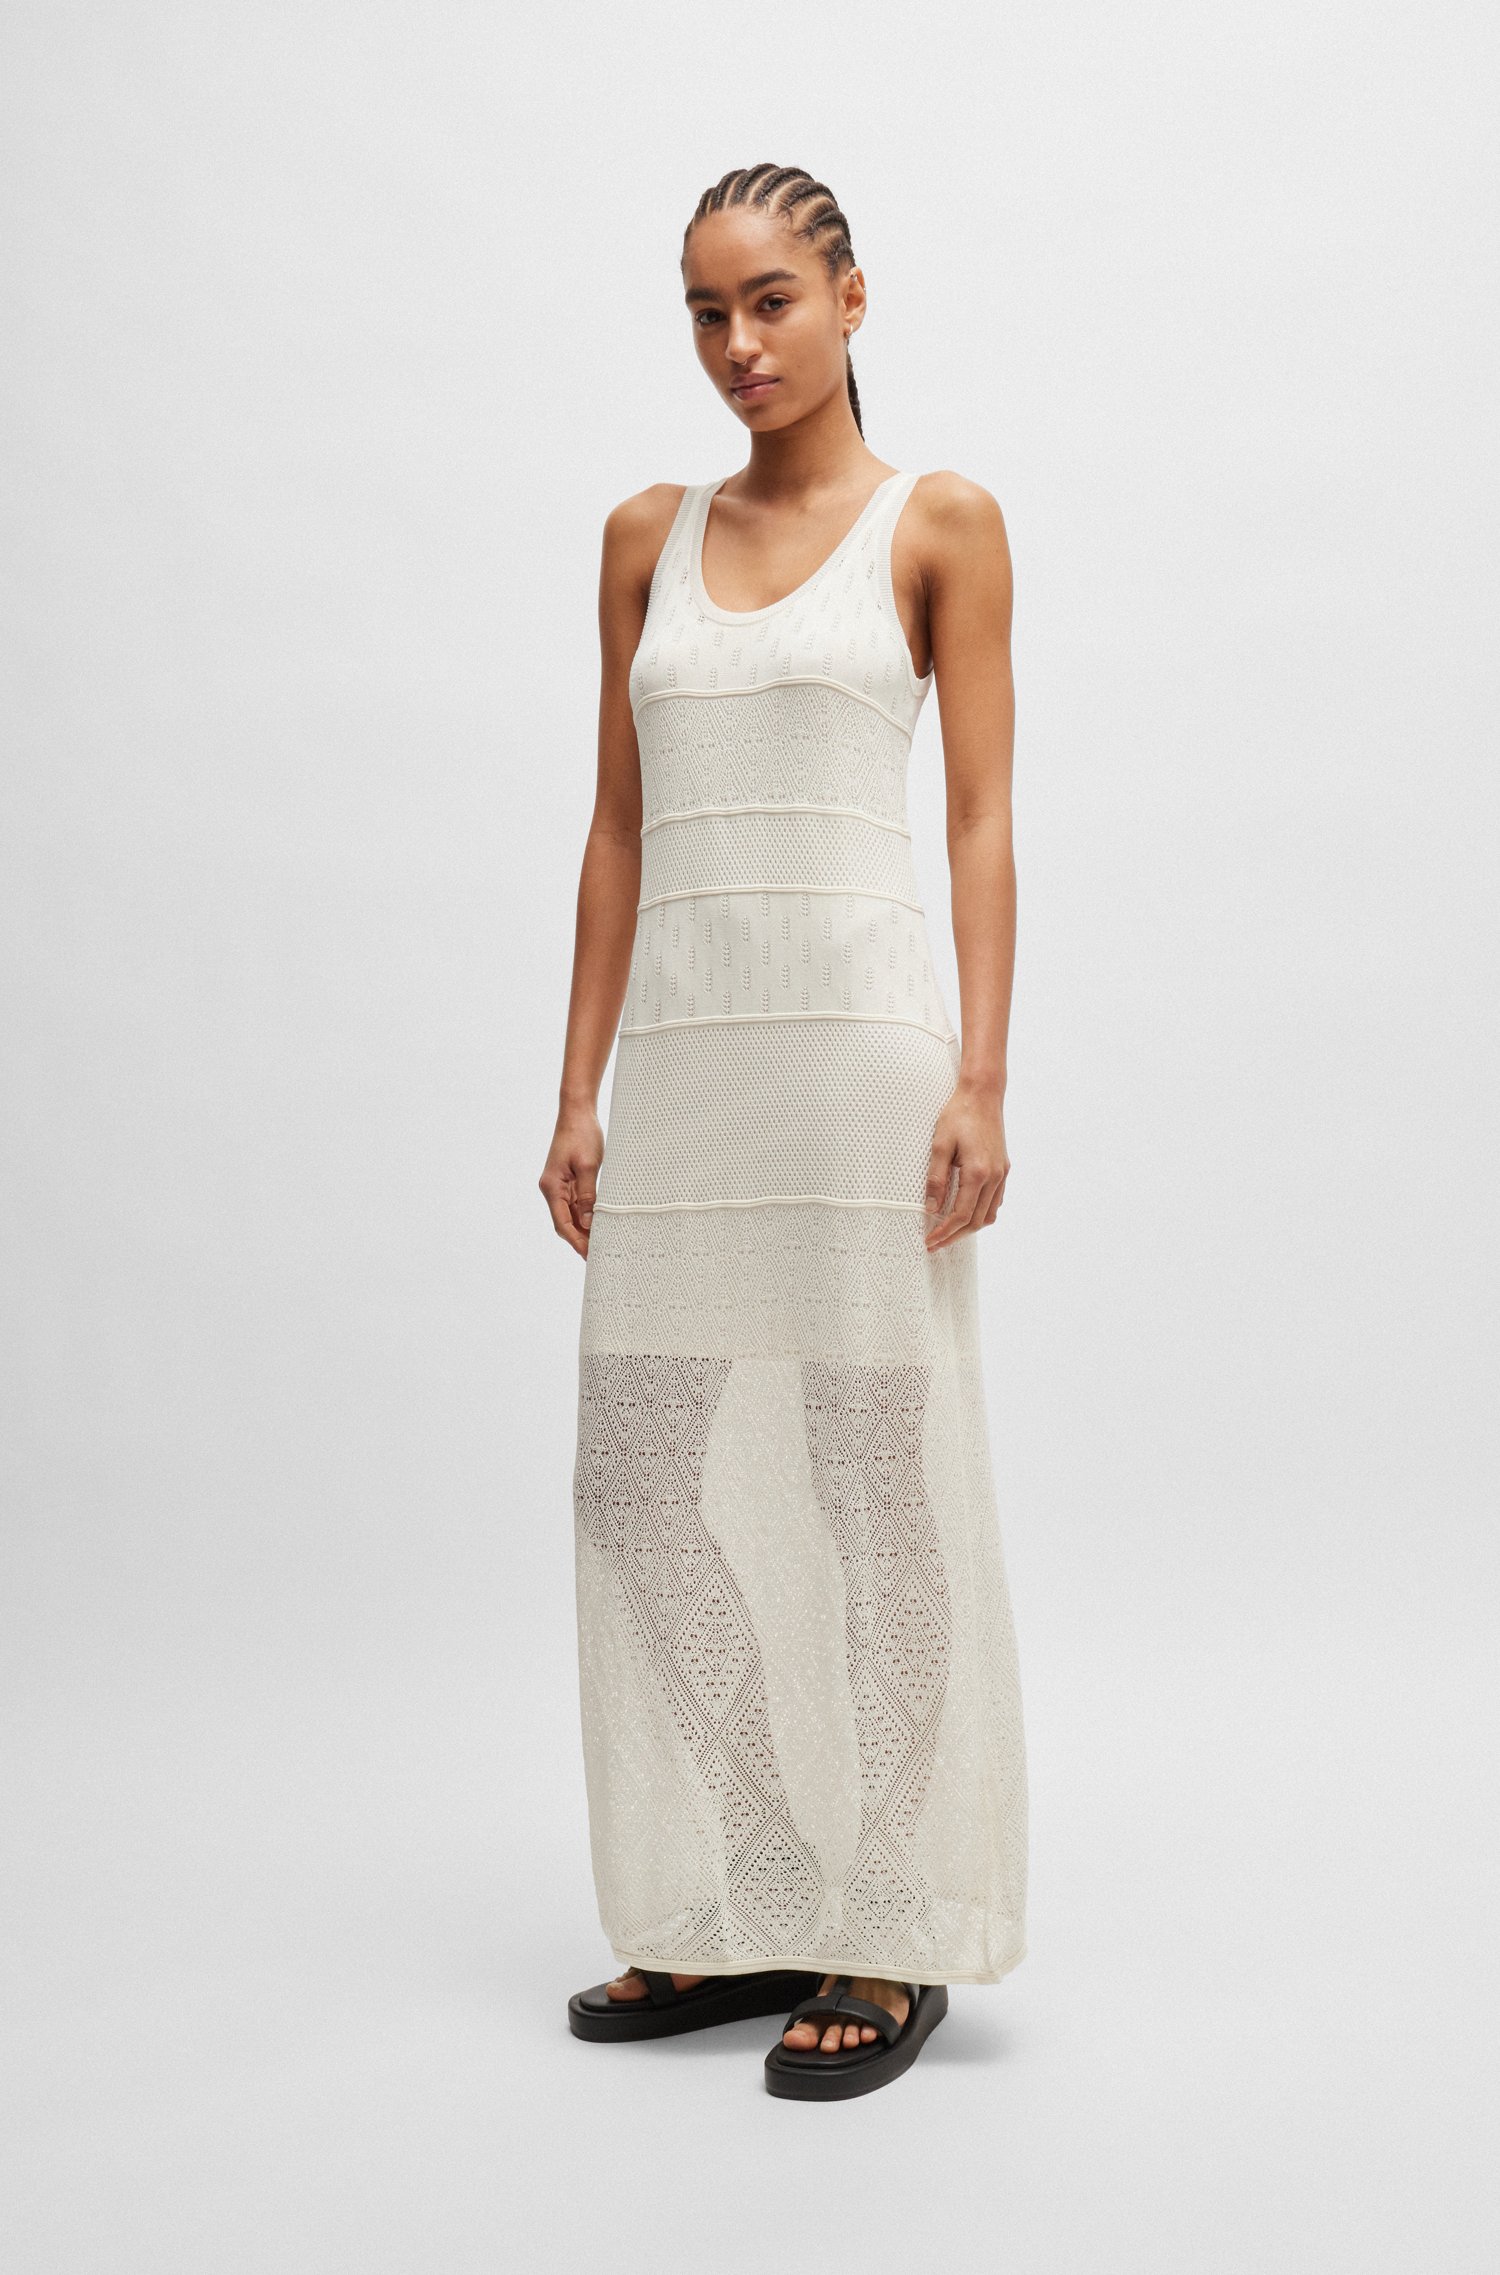 Knitted dress midi length with mixed structures